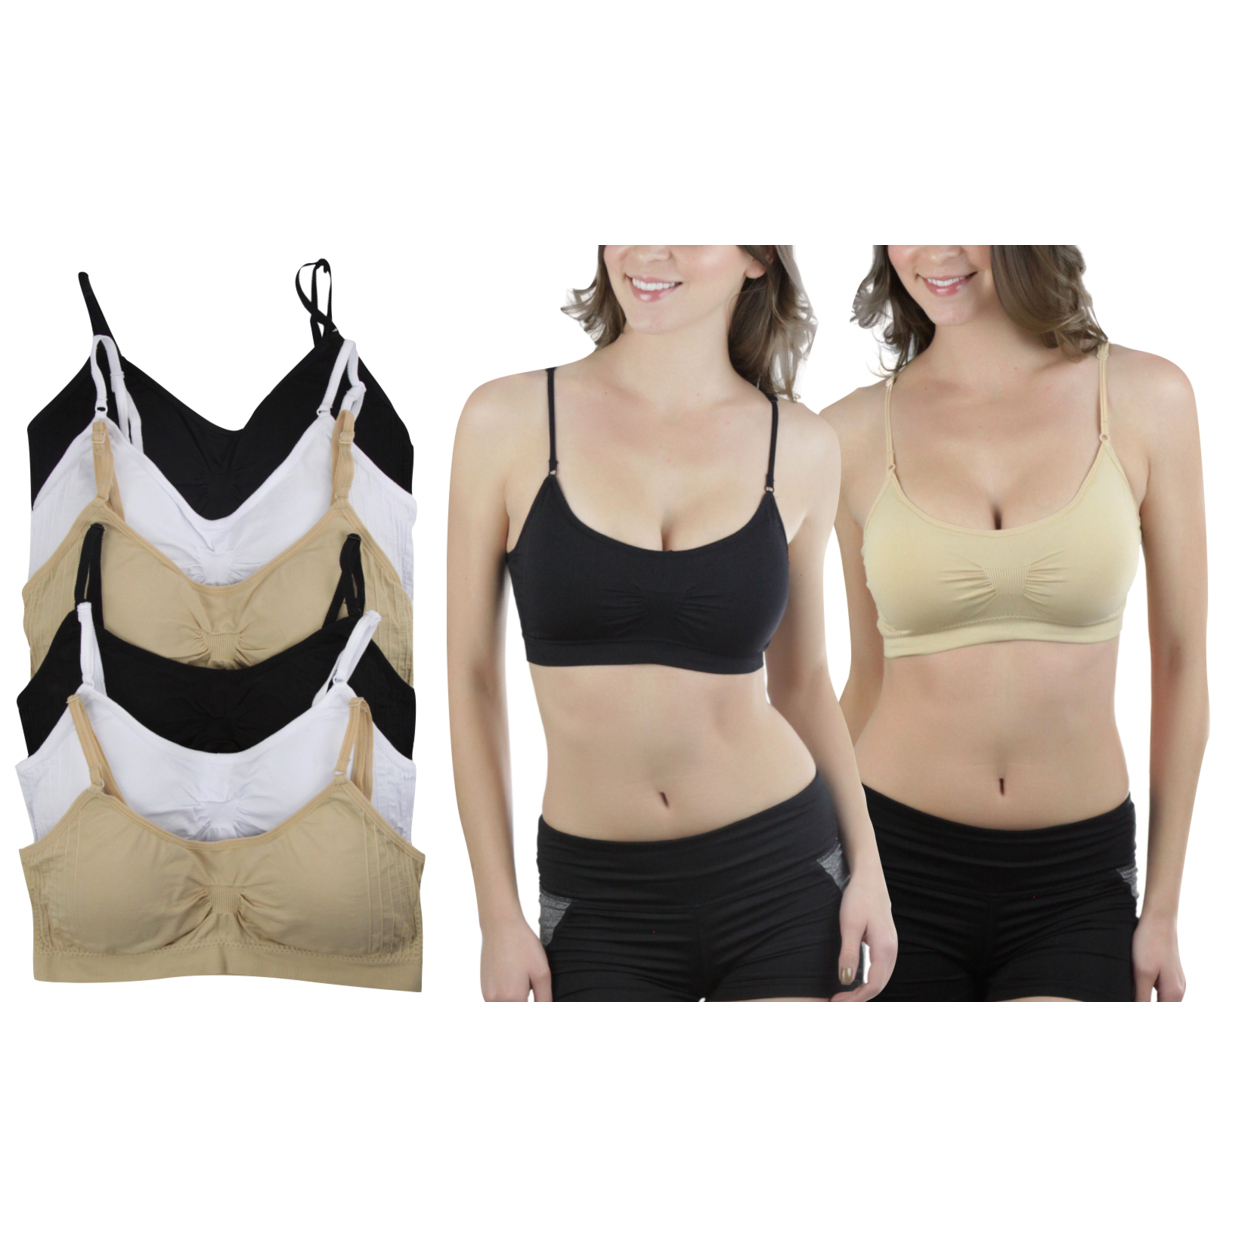 6-Pack Of Women's Seamless Padded Supportive Bralettes - Basic